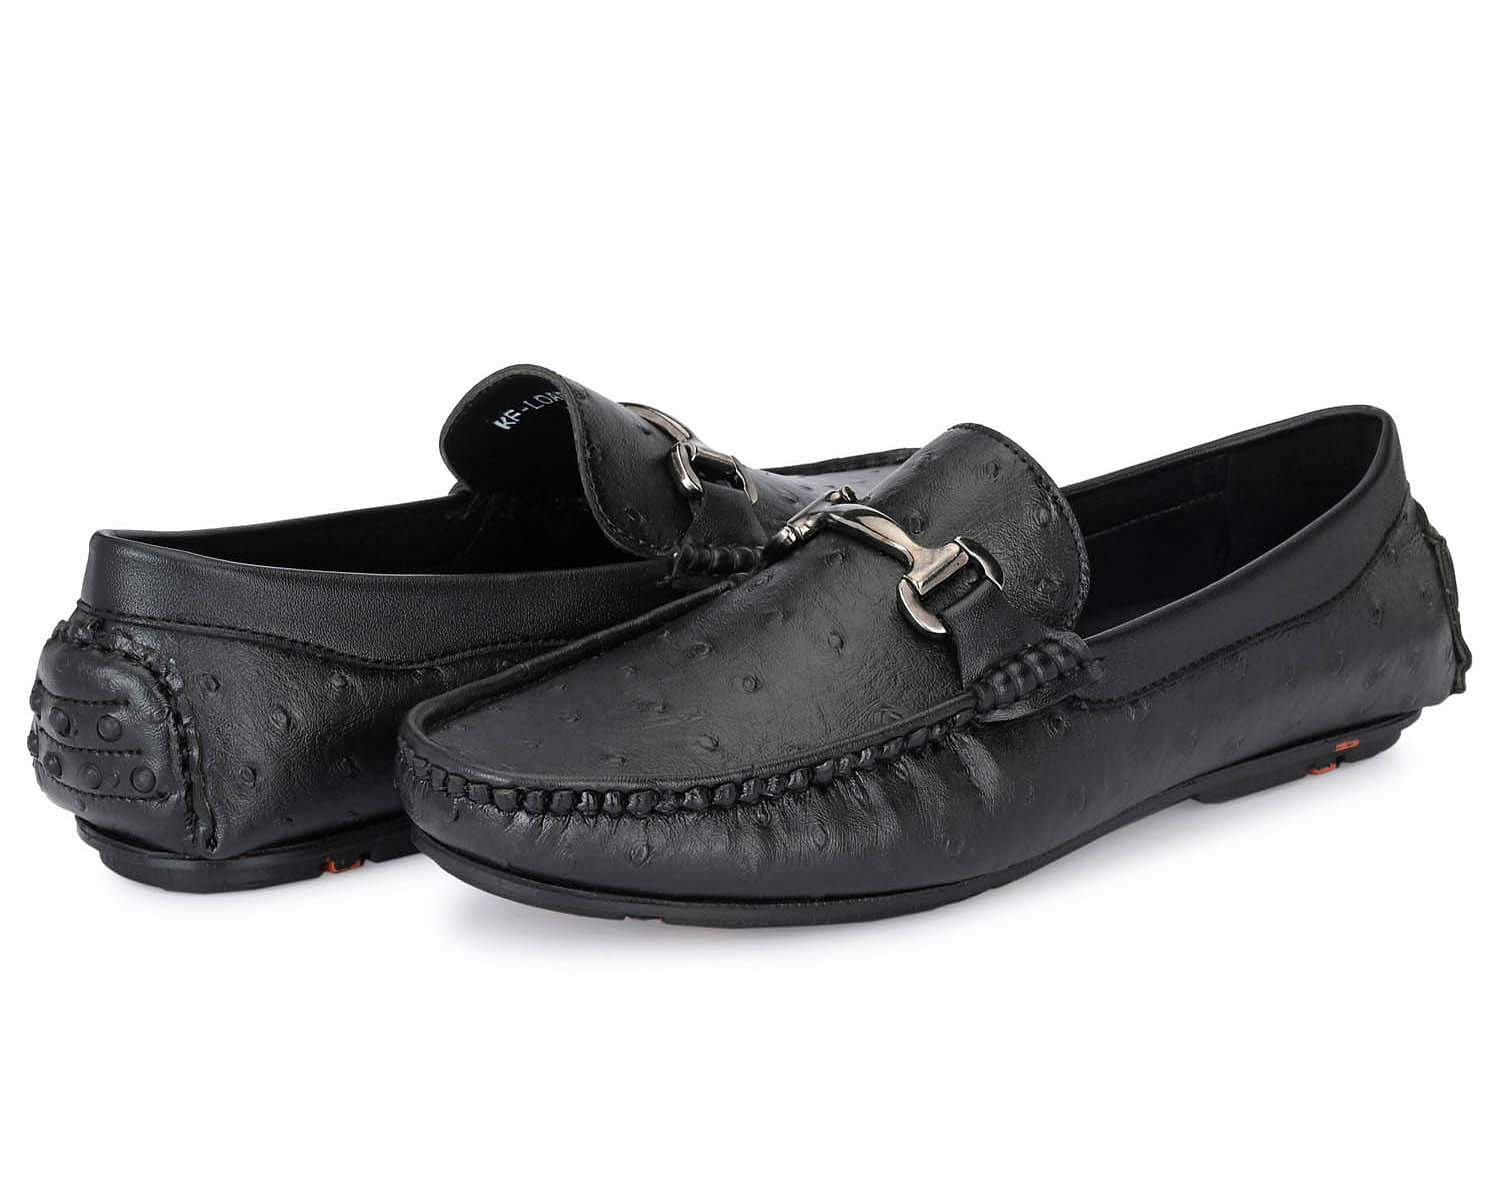 Pair-it Men's Loafers Shoes -KF-Loafer 115- Black